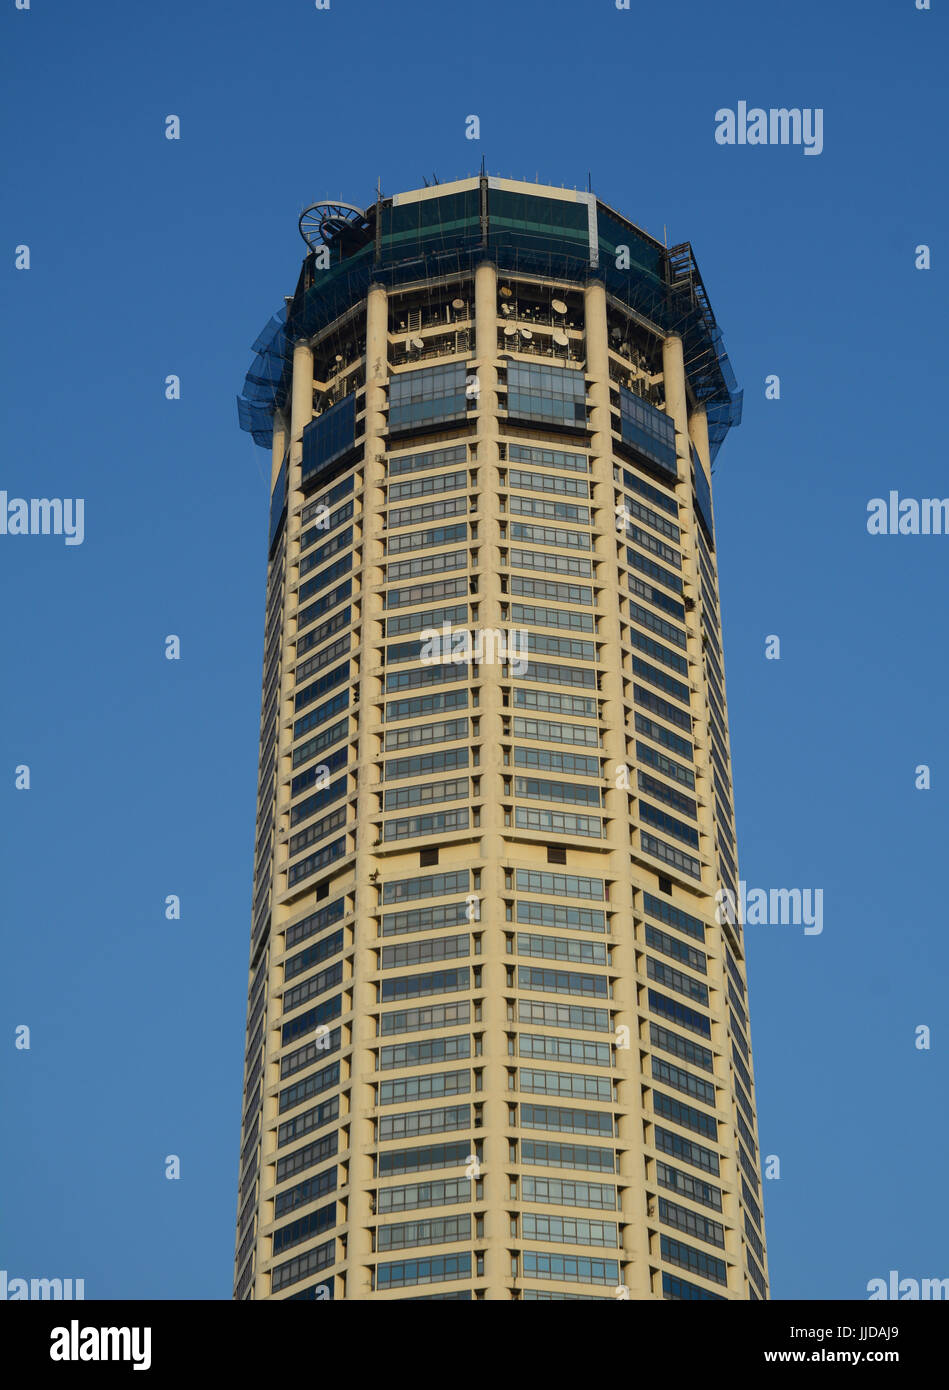 Penang, Malaysia - Mar 9, 2016. The Komtar Building in Penang, Malaysia. Penang is also one of the most urbanised and economically-important states in Stock Photo